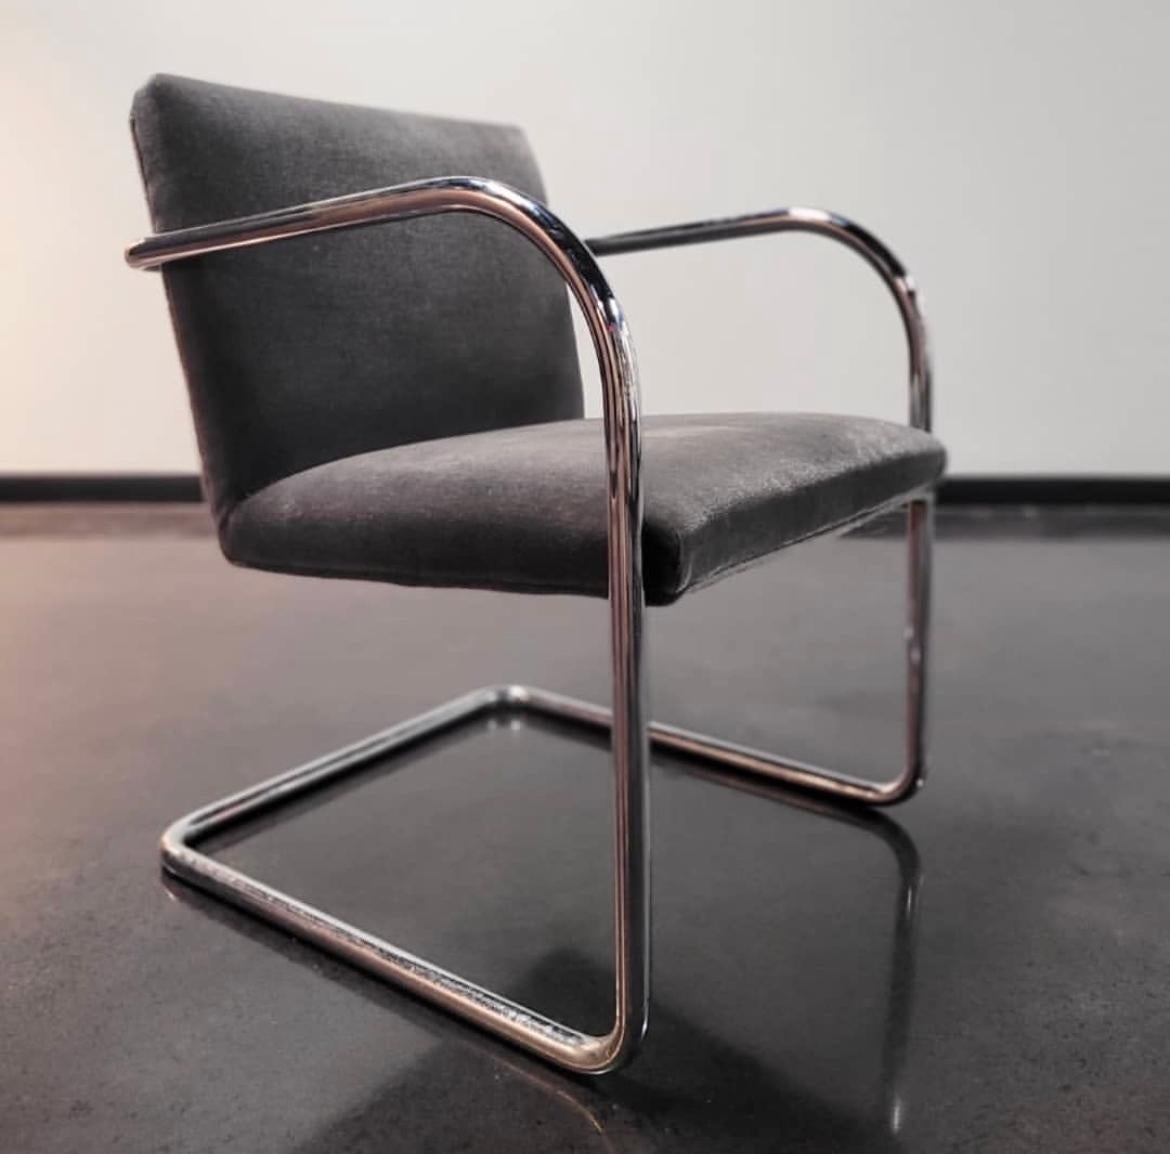 Beautiful Knoll style Brno chair set of 2. Stainless steel sled base.